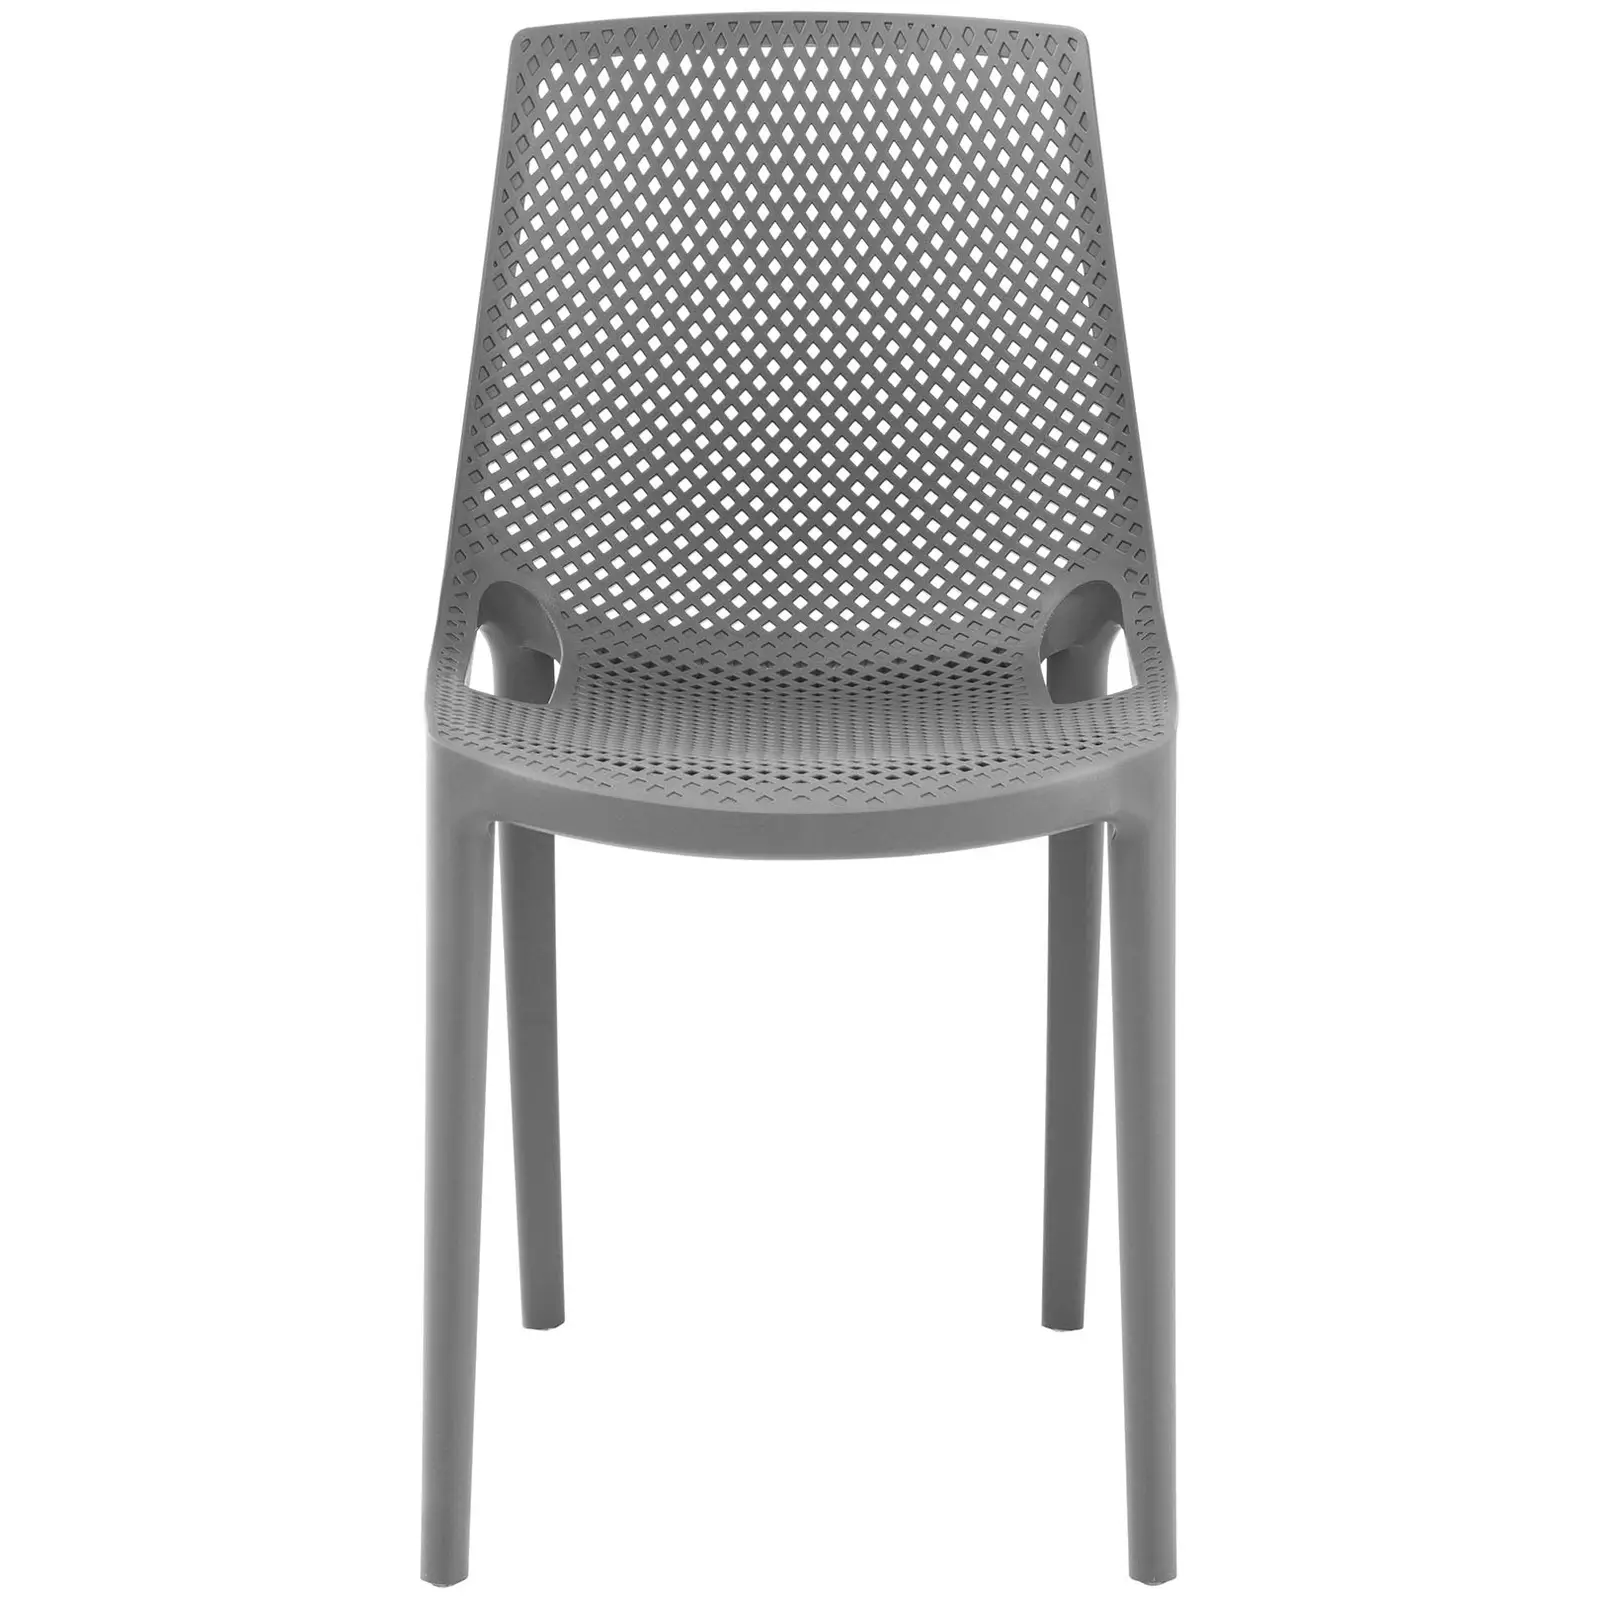 Factory second chair - set of 4 - Royal Catering - up to 150 kg - woven backrest - gray